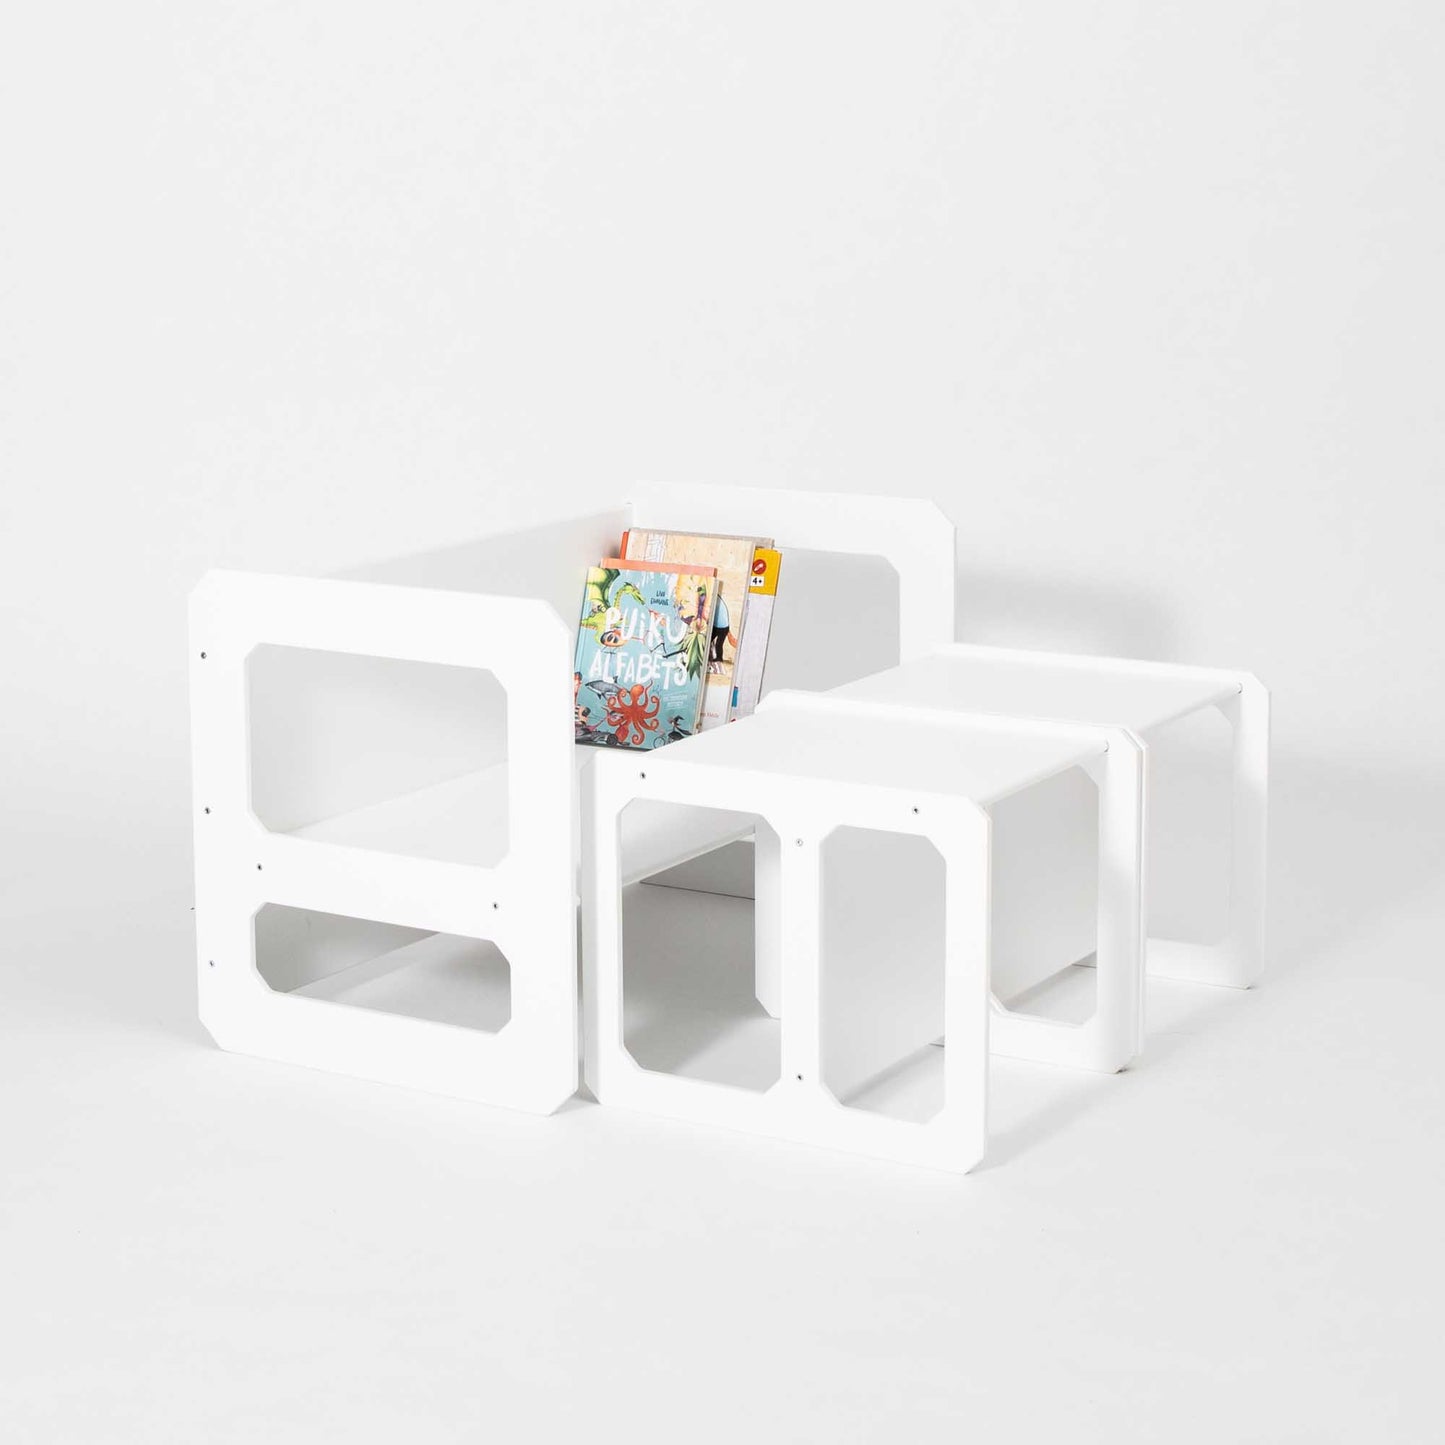 A Montessori weaning table and 2 chair set with books and magazines on it.